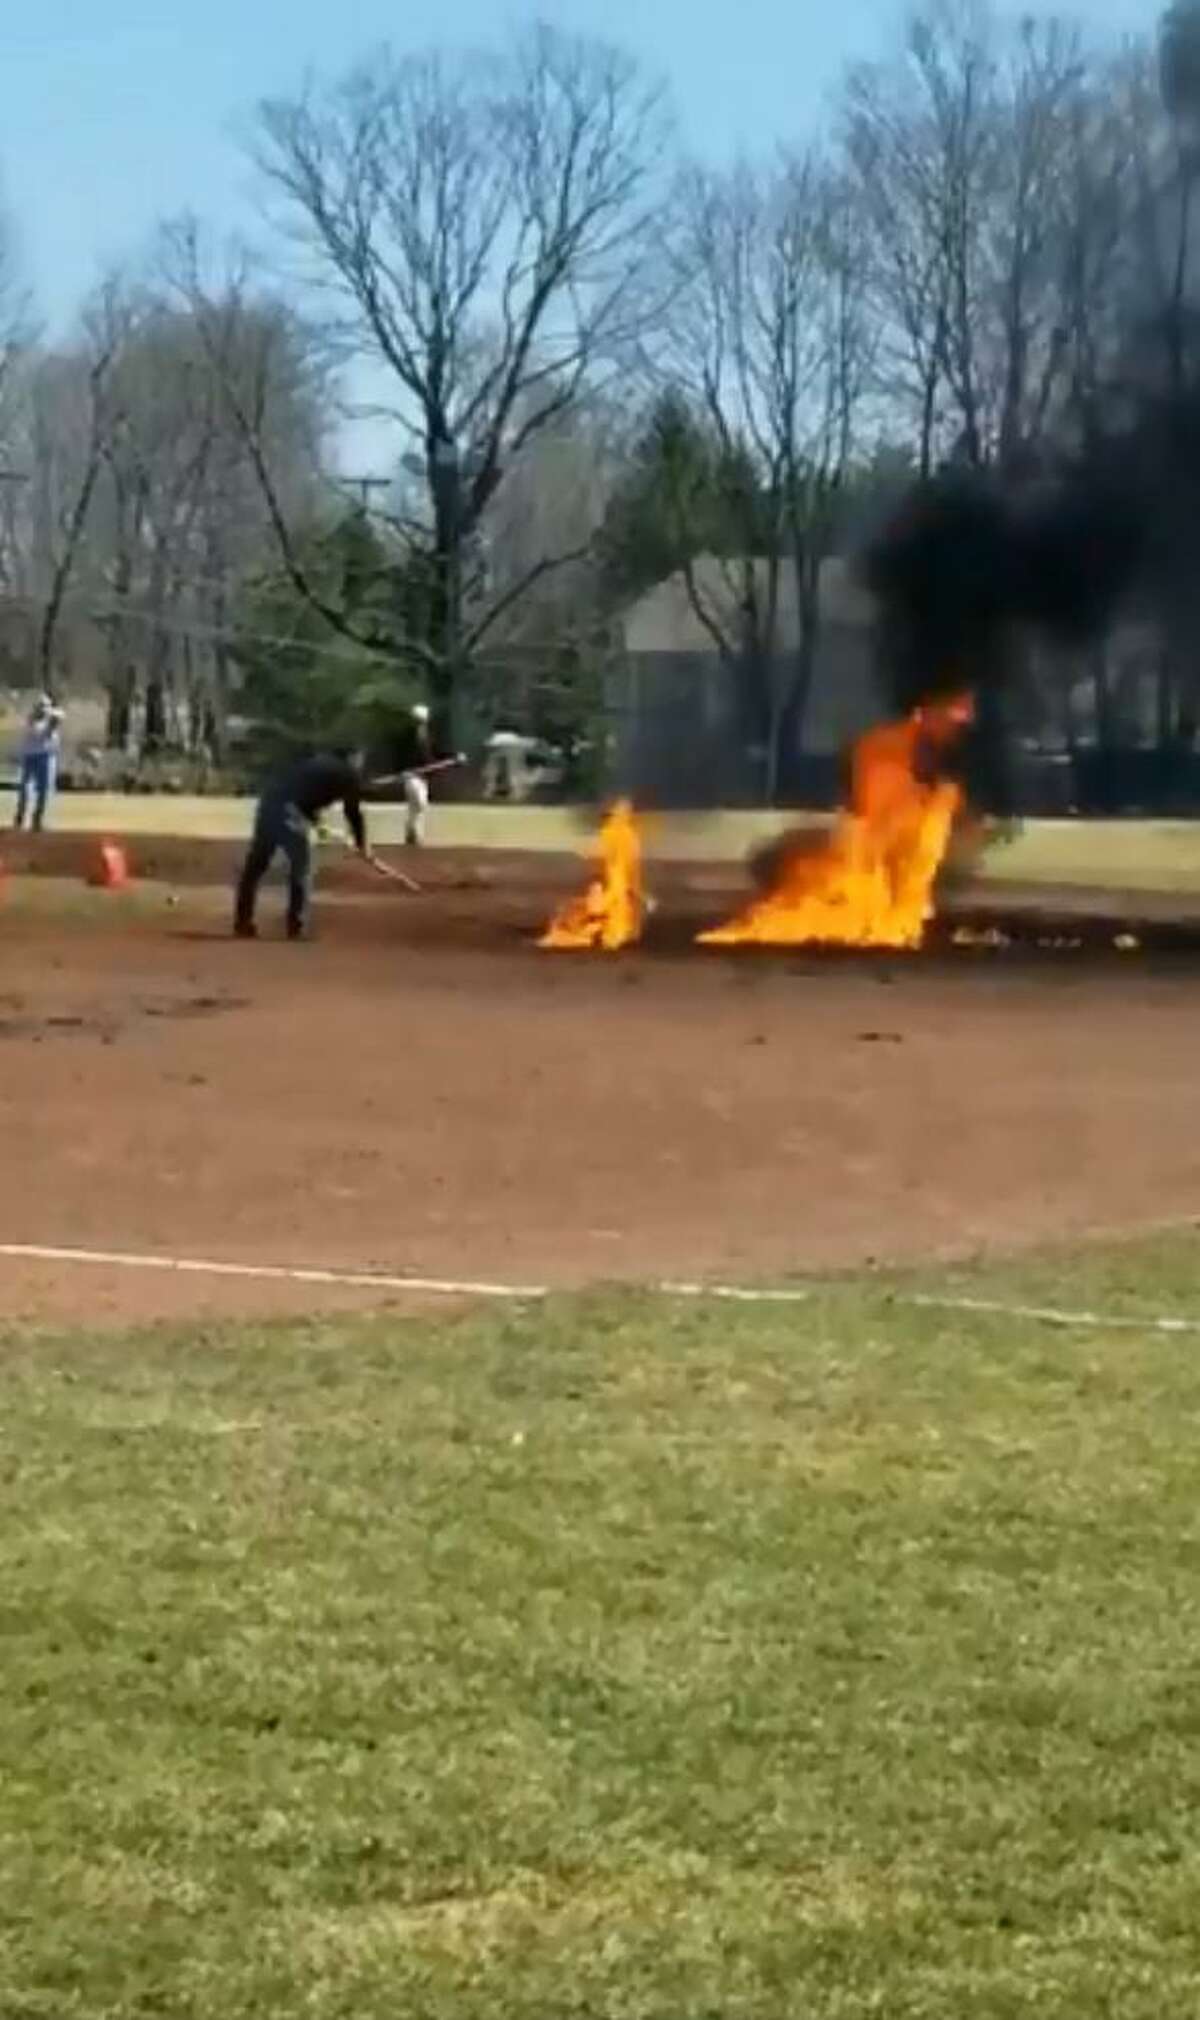 On Saturday, 25 gallons of gasoline were poured onto the infield of Ciuccoli Field, in Ridgefield, and lit on fire in an attempt to make the field playable for the Ridgefield High School baseball team.